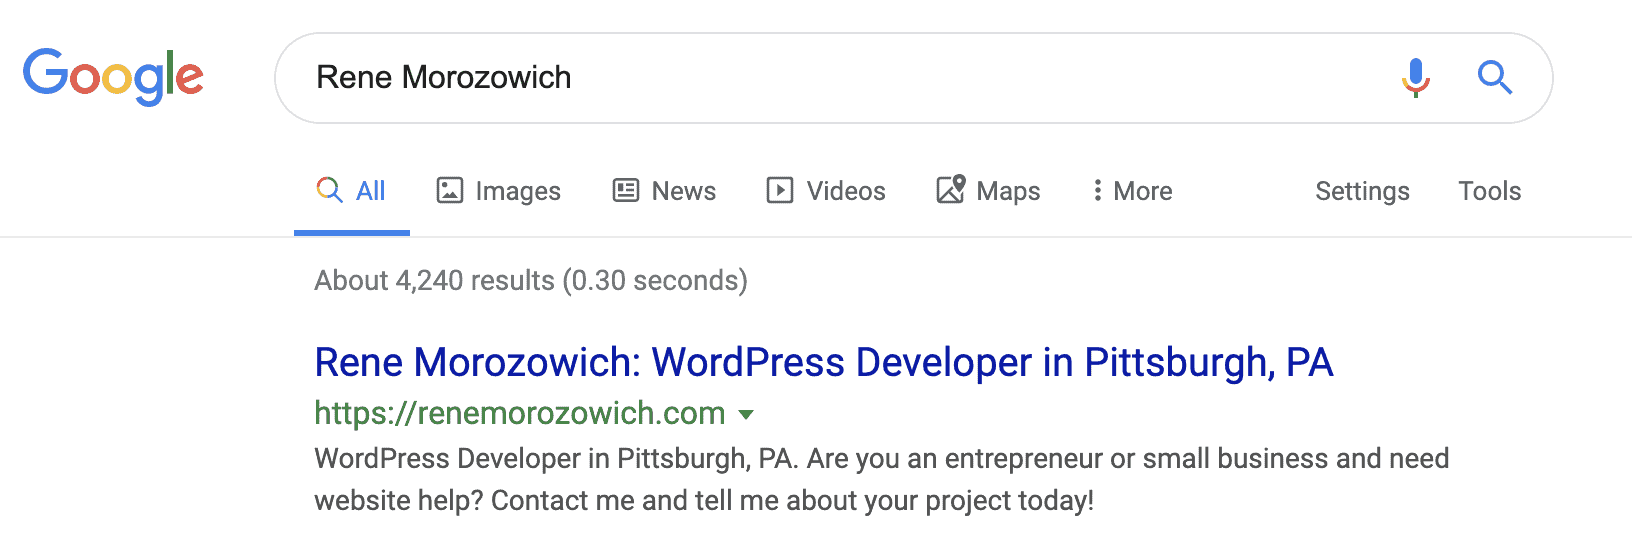 Search results for Rene Morozowich